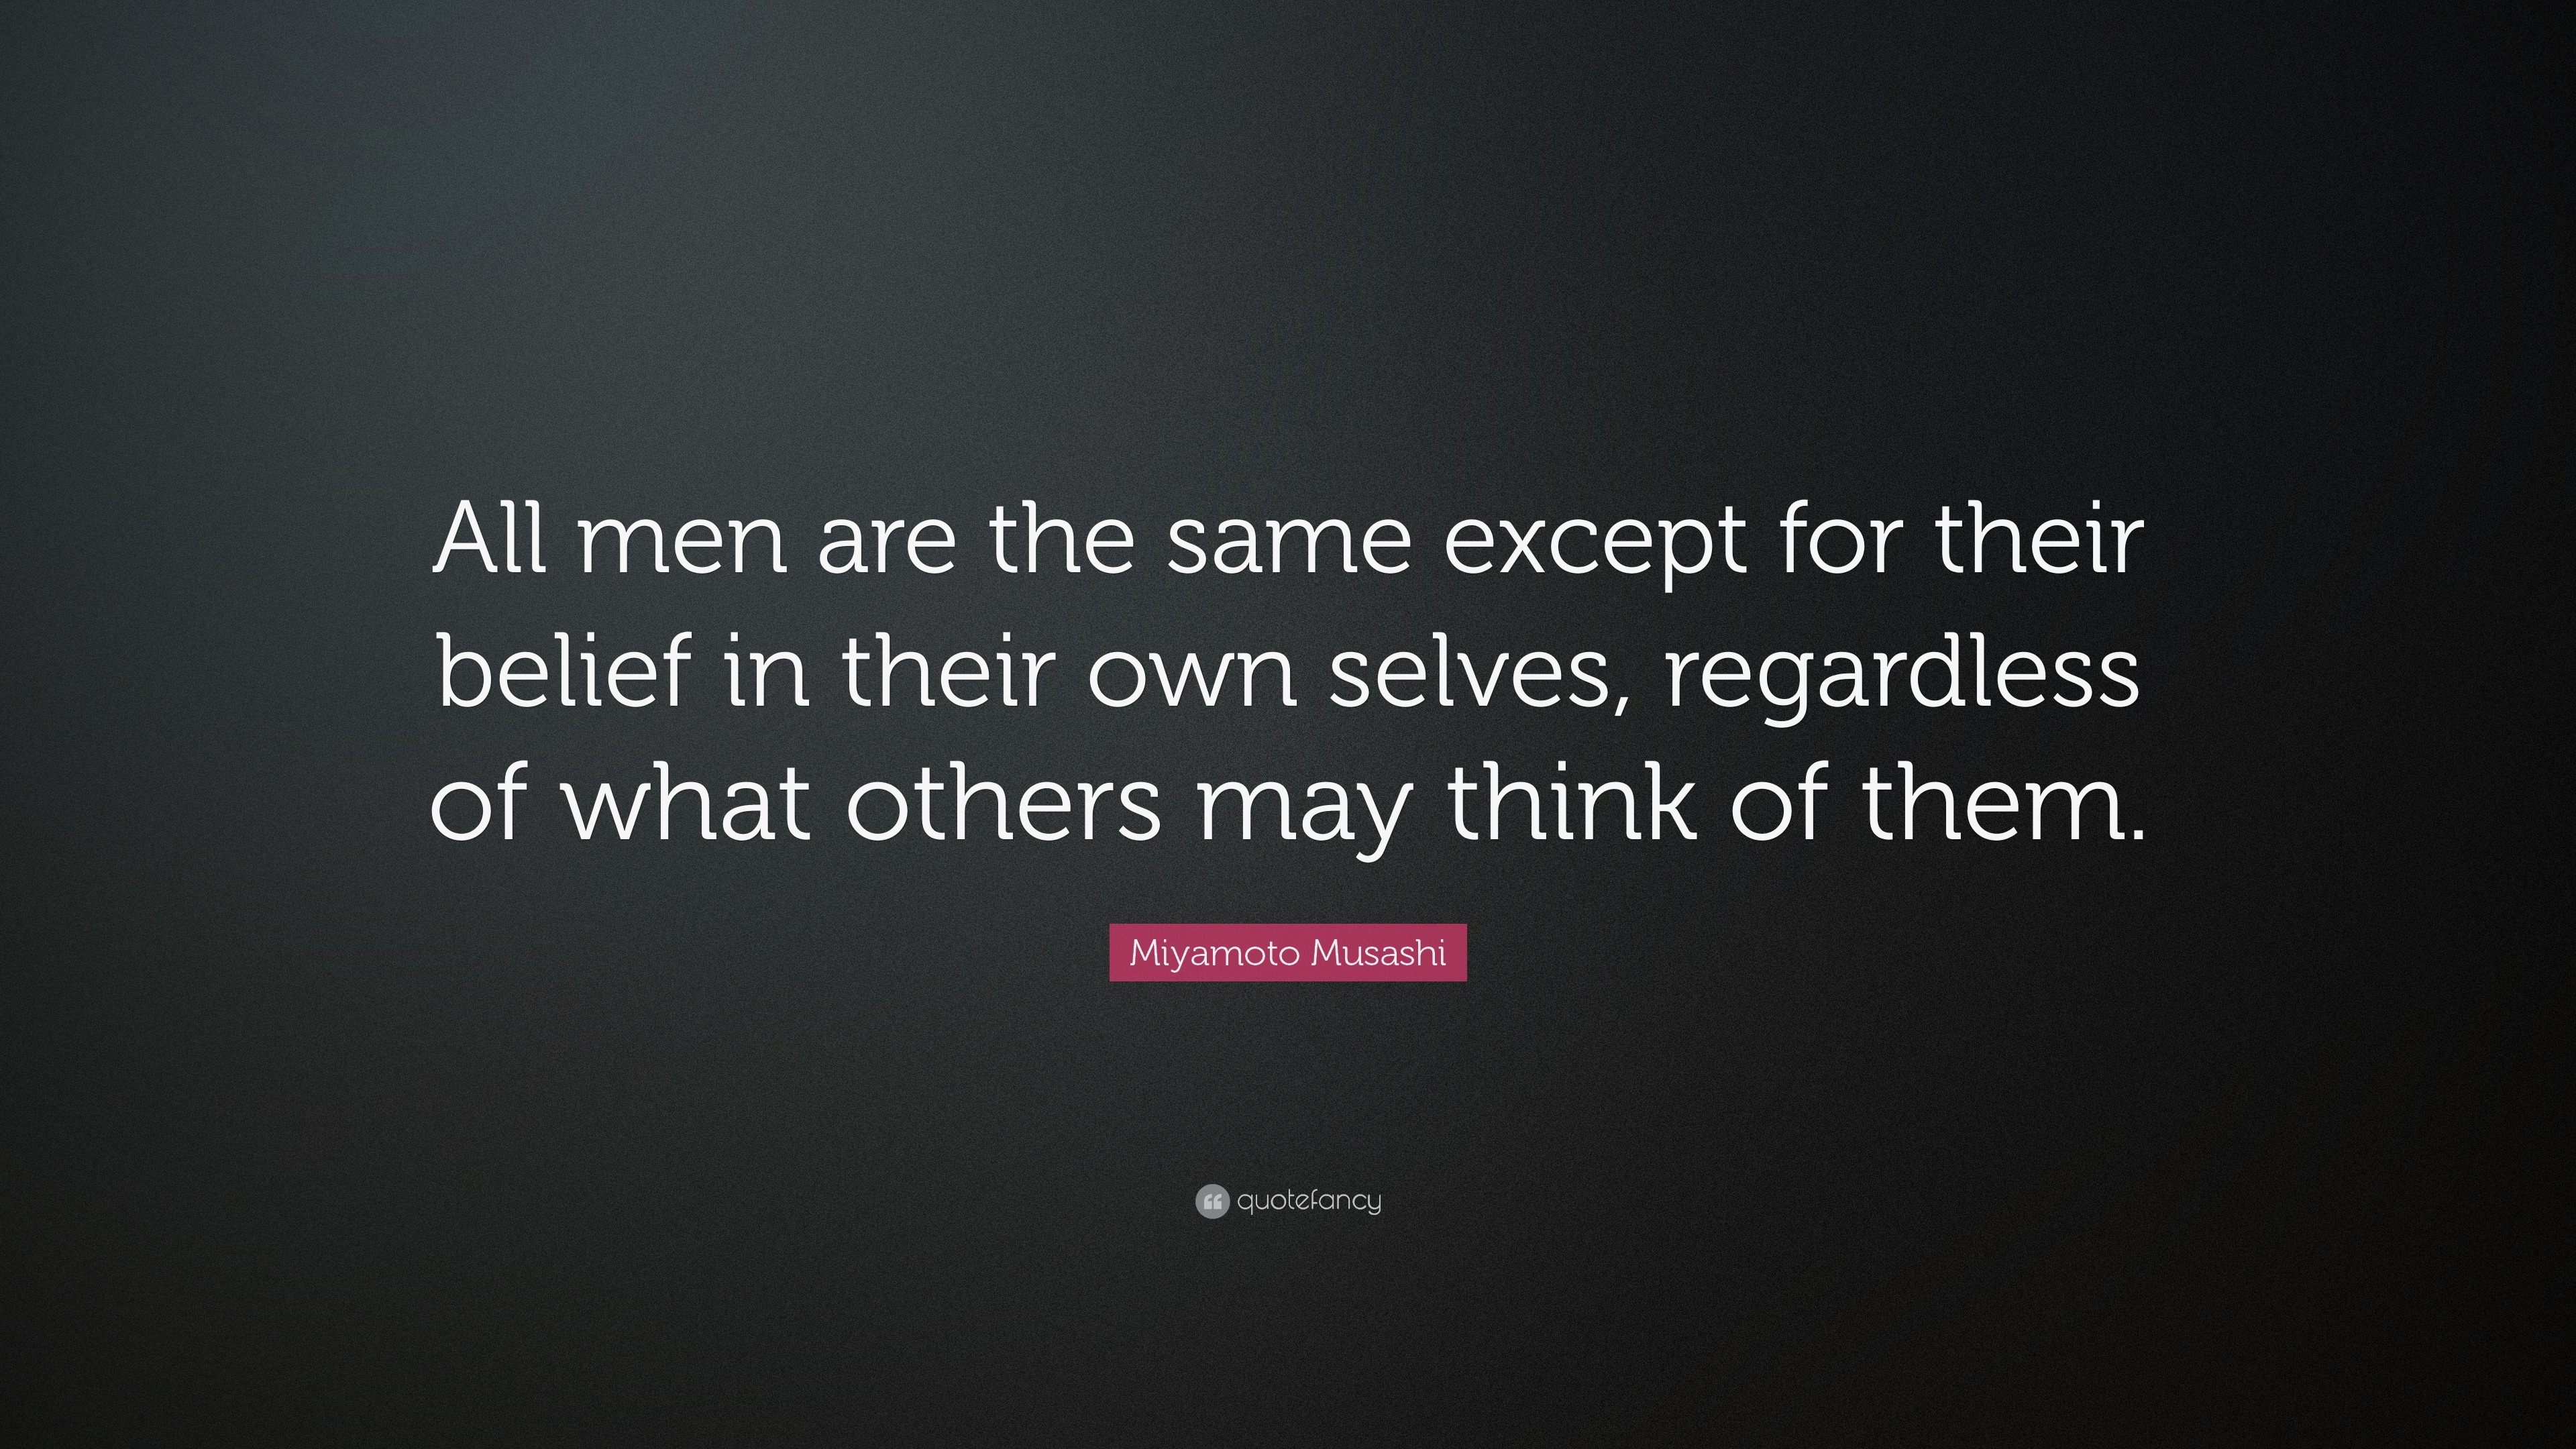 Miyamoto Musashi Quote: “All Men Are The Same Except For Their Belief In Their Own Selves,